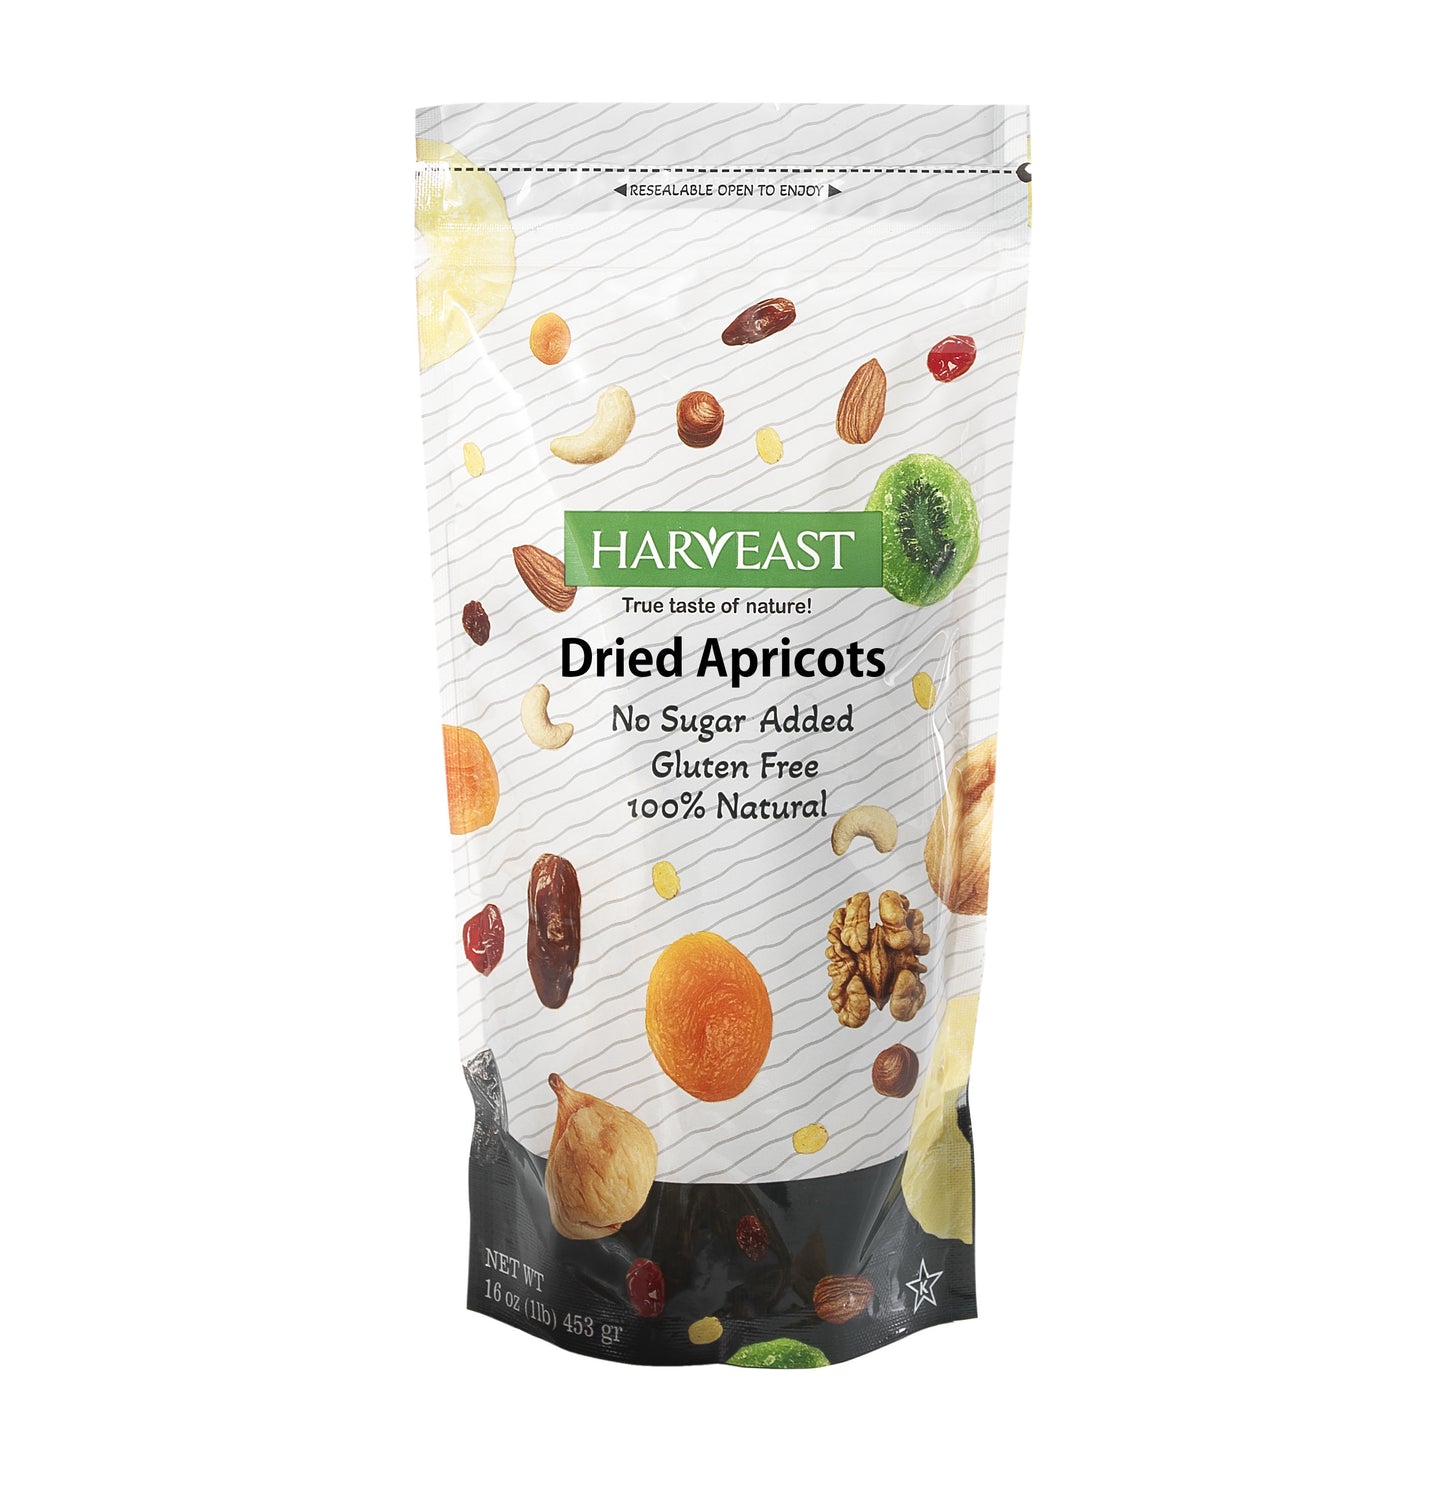 HARVEAST Dried Apricots - Turkish Gourmet Dried Jumbo Apricots, No Sugar Added, Gluten Free, Kosher, 100% Natural – Sweet & Fresh Dehydrated Apricots Vegan Snack in Resalable Bag (1 Lb)